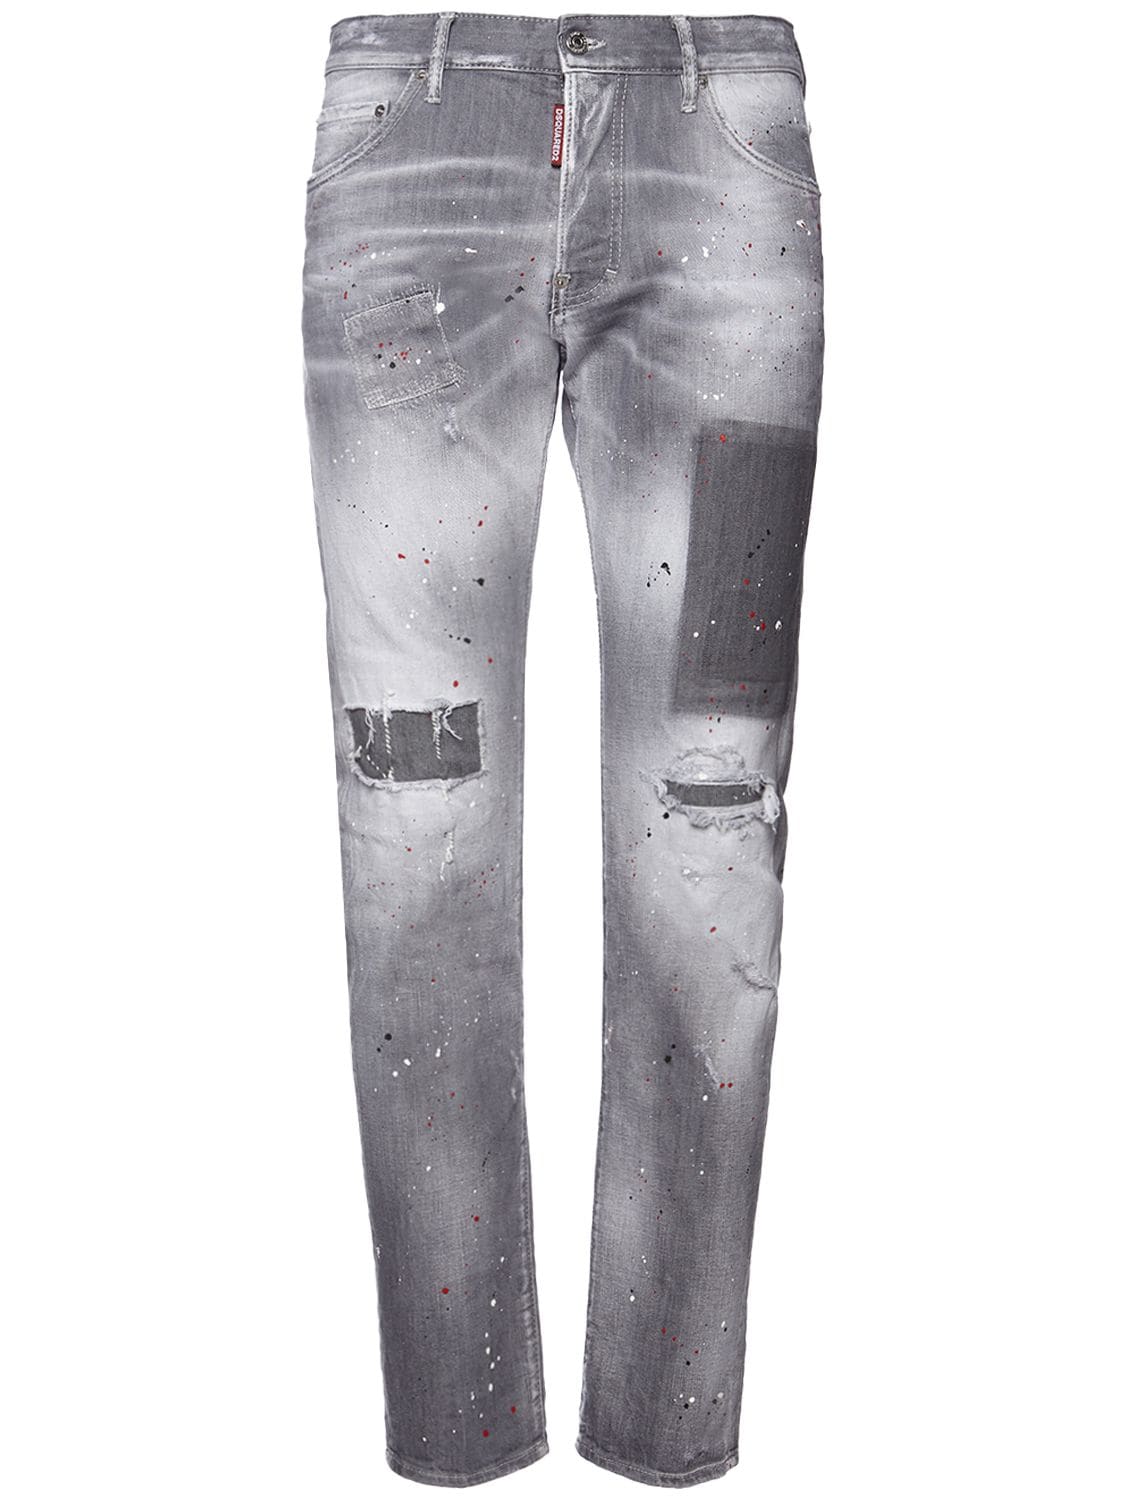 DSQUARED2 SURF & FUN COOL GUY JEANS